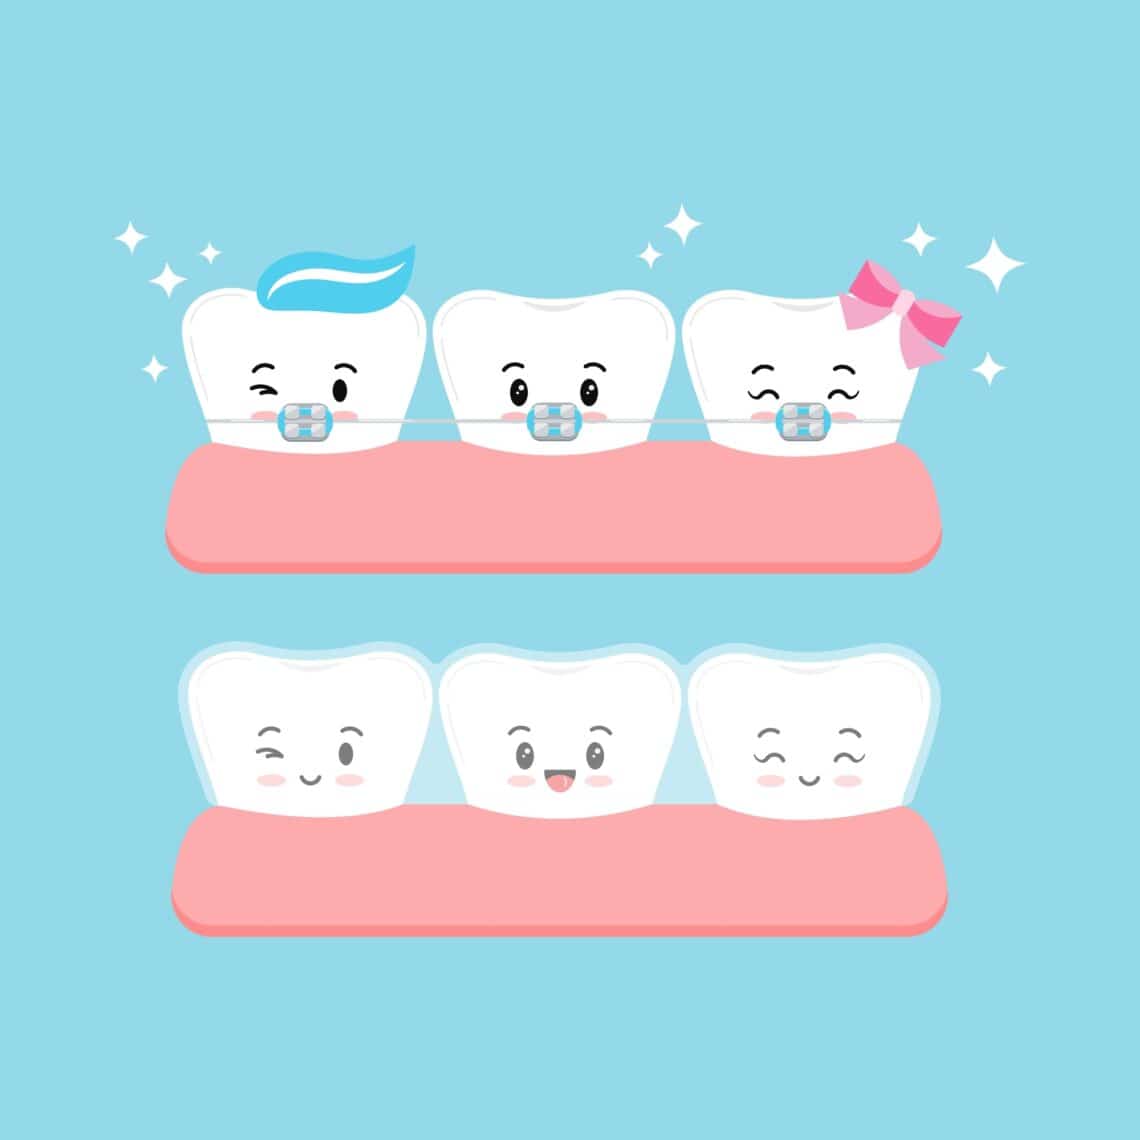 Invisible braces and brackets on tooth set. Dental invisalign braces vs metal white tooth orthodontic correction treatment concept. Vector flat design kawaii kid tooth dentistry mascot illustration.